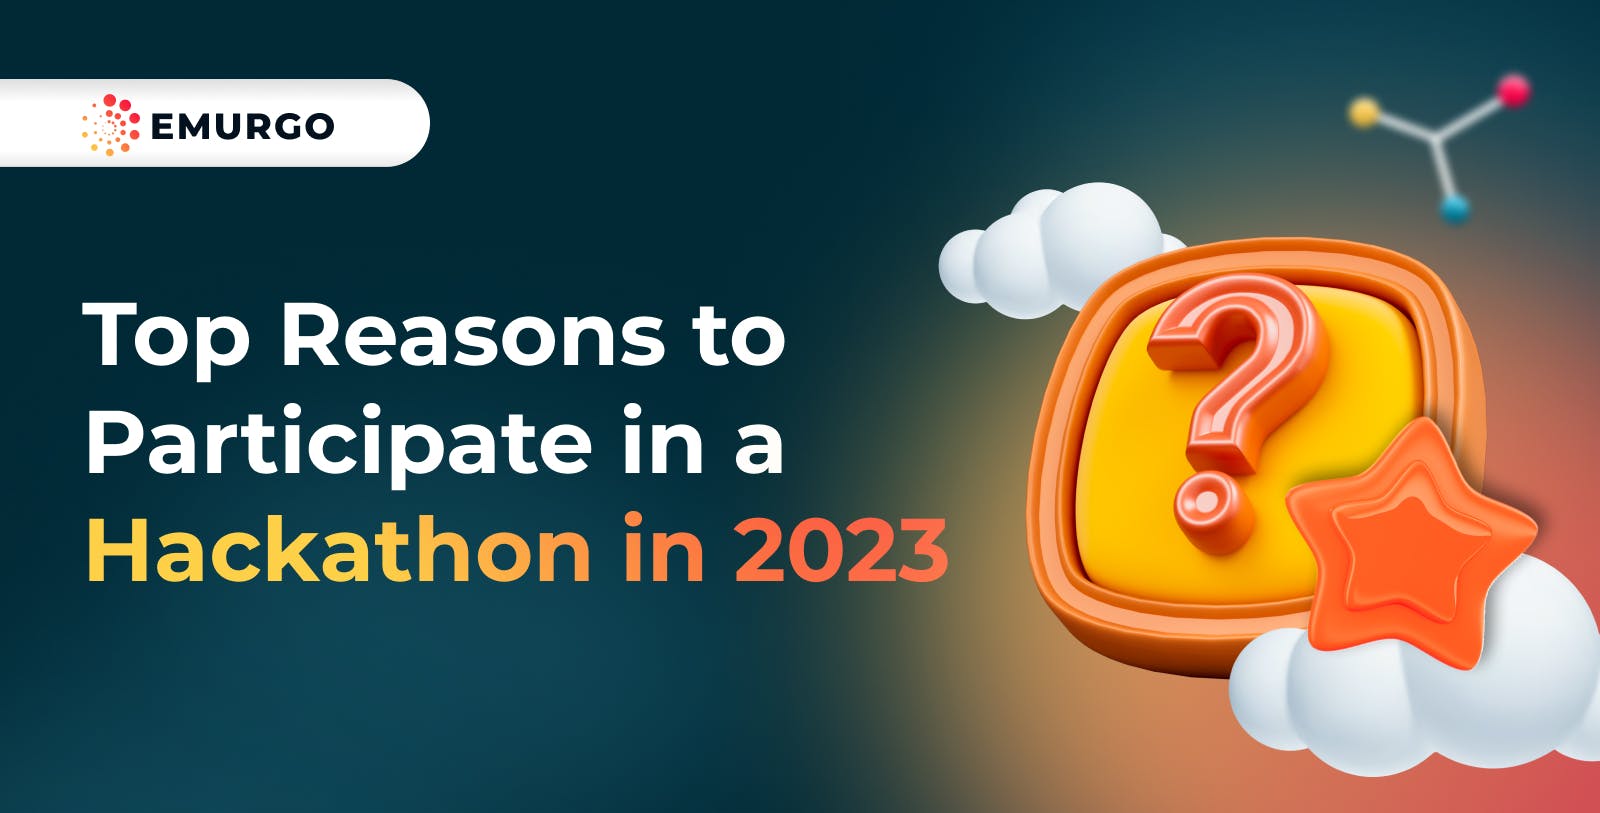 Top-Reasons-to-Participate-in-a-Hackathon-in-2023.jpg